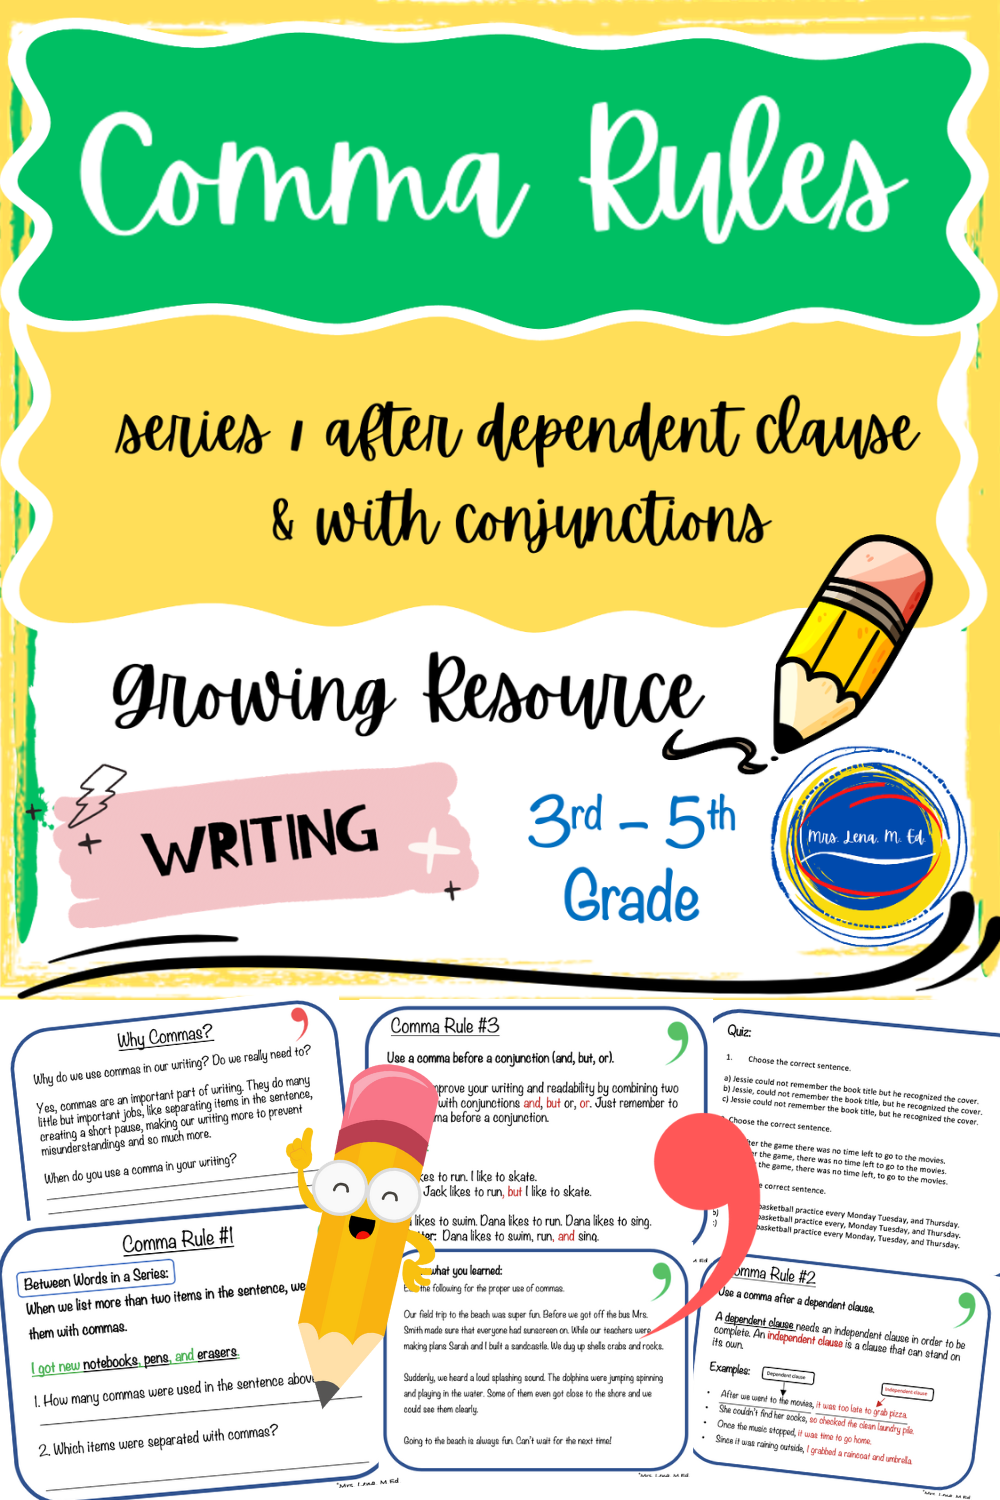 This resource includes:

3 Main Comma Rules - Series, Dependent Clause and Conjunctions
Between Words in Series Examples and Activities
The use of Commas Between Dependent and Independent Sentences - examples and practice
The Use of Commas Before Conjunctions
All three rules will help students not only learn how and when to use commas in their writing but be better writers and editors of their text and texts of others.
The Post Lesson Quiz & Answer Key(s) Included